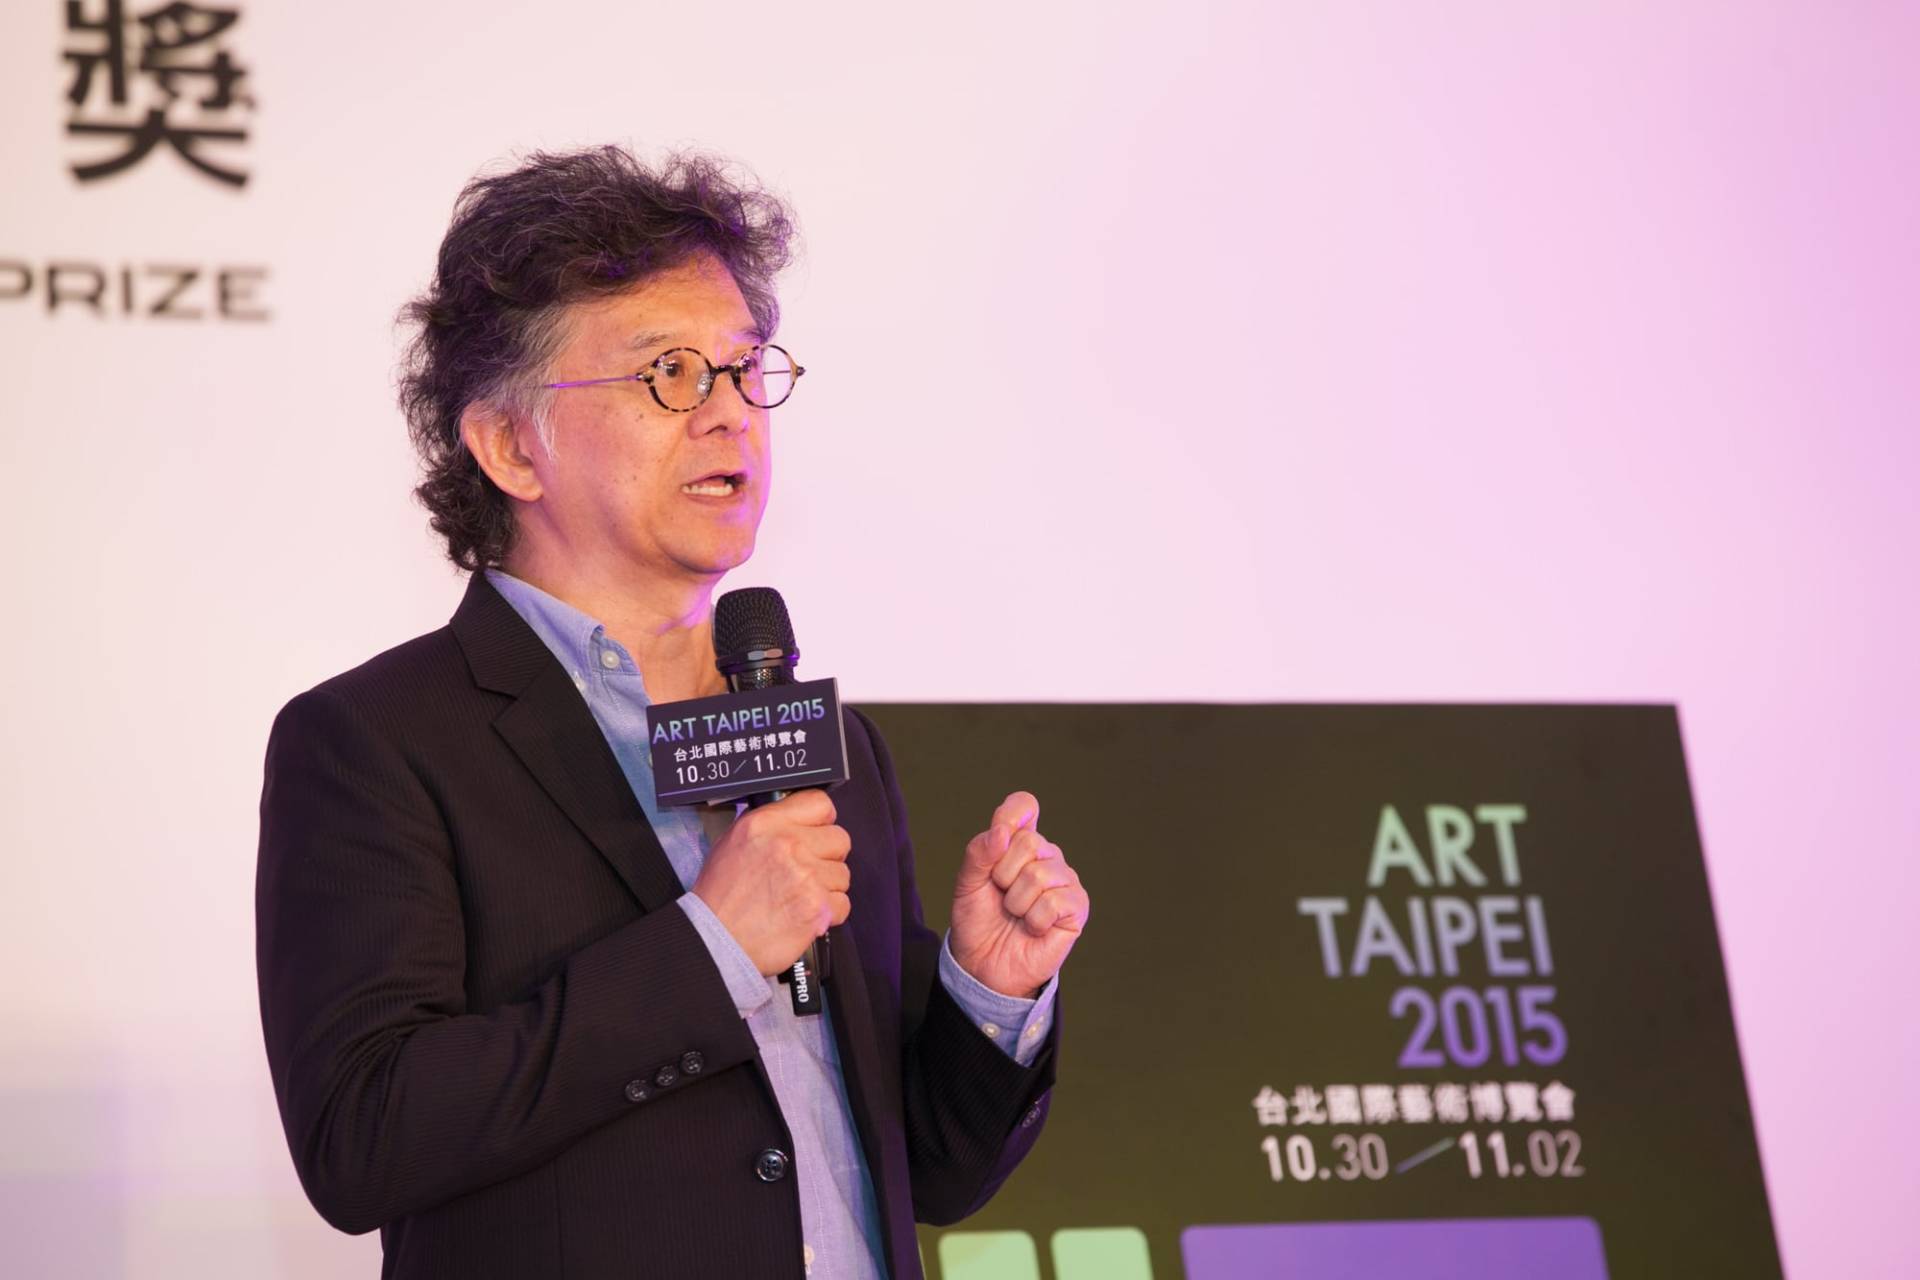 Executive Director Rick Wang articulates new ambitions for ART TAIPEI as an established global art commerce platform and a unifying voice for interncontinental talents